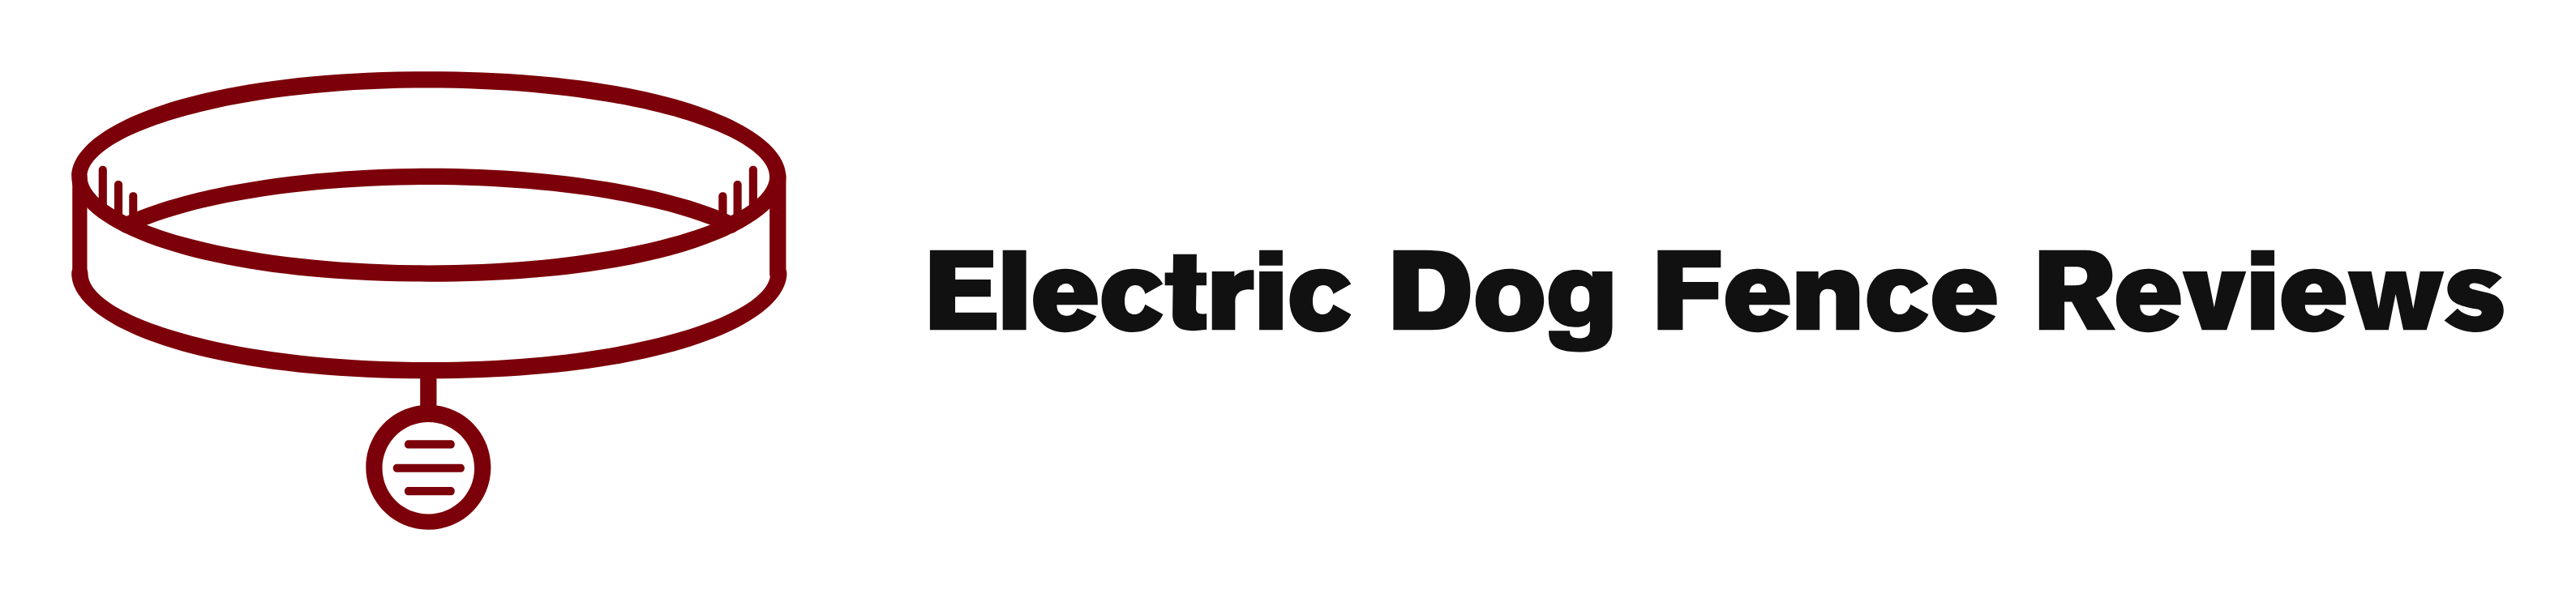 Electric Dog Fence Reviews